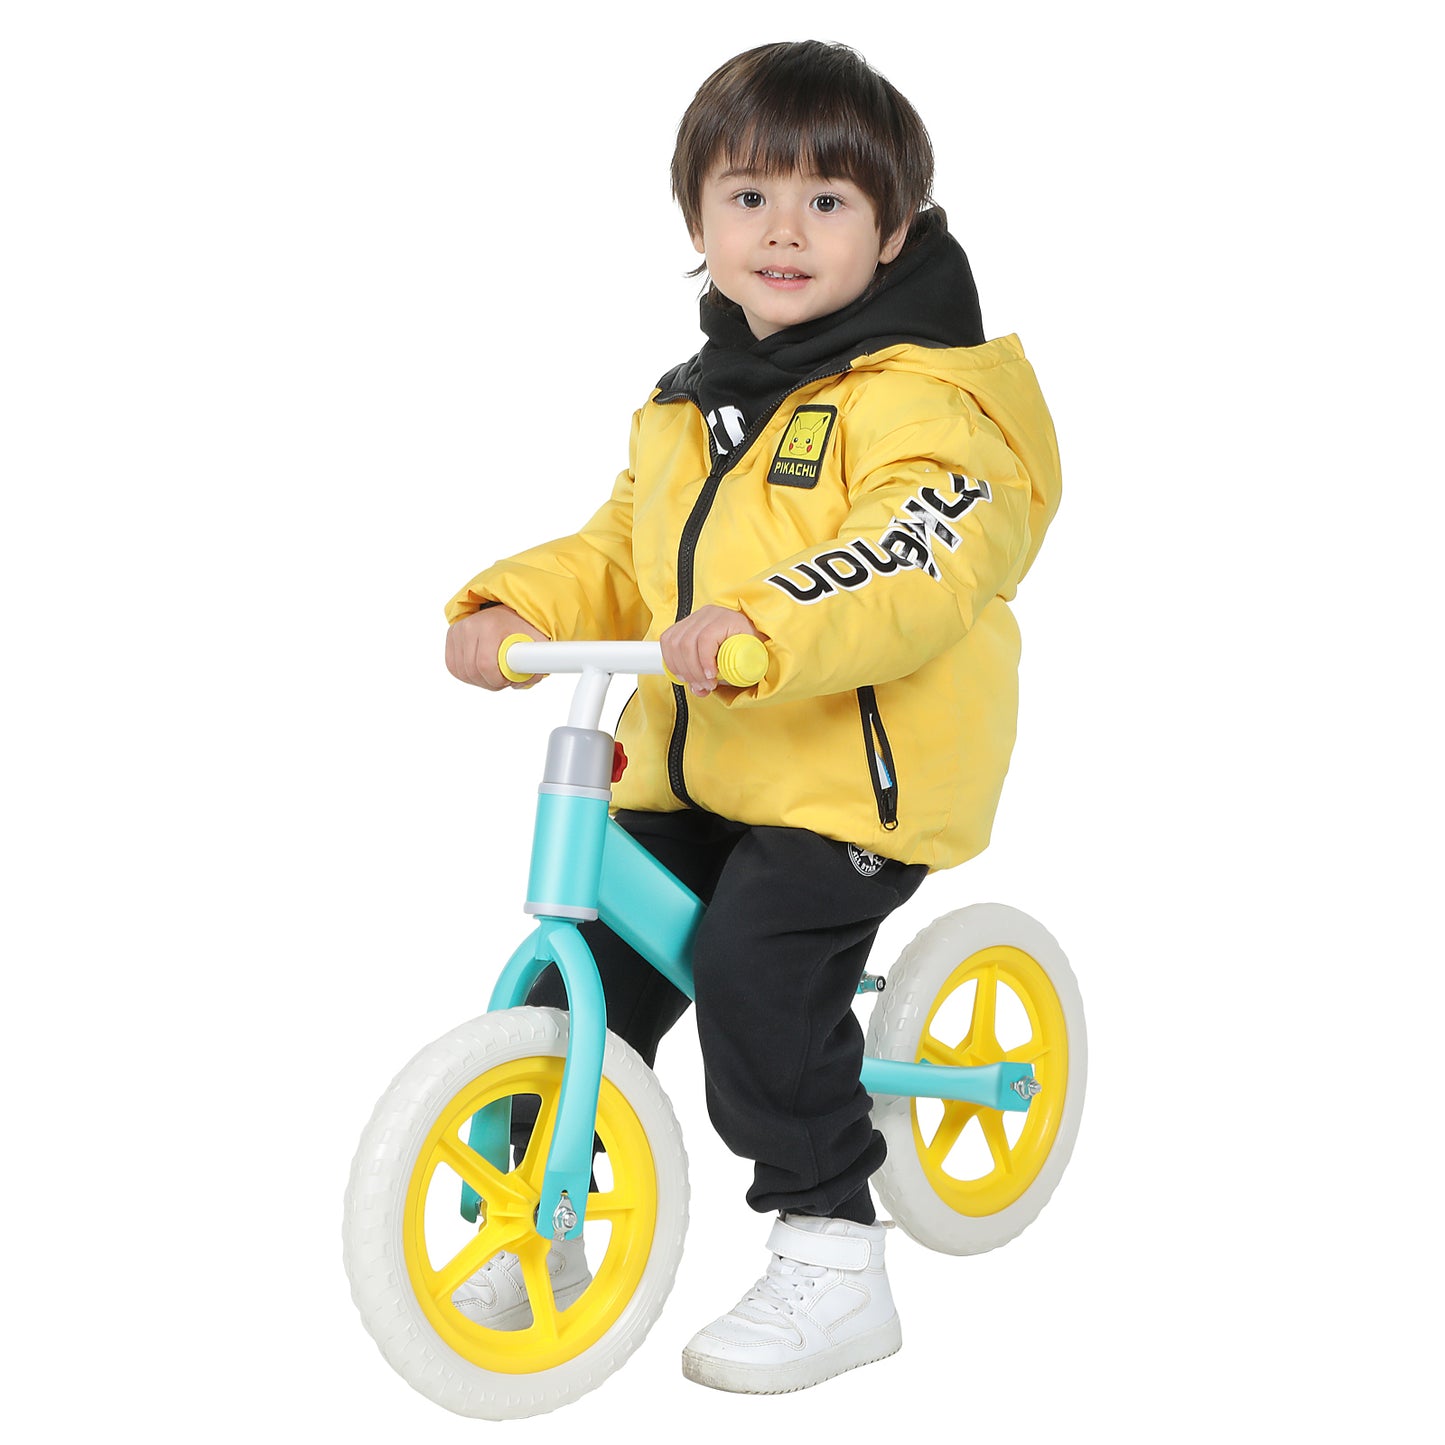 11inch Kids Balance Bike Adjustable Height Carbon Steel & PE Tires for 2-6 Years